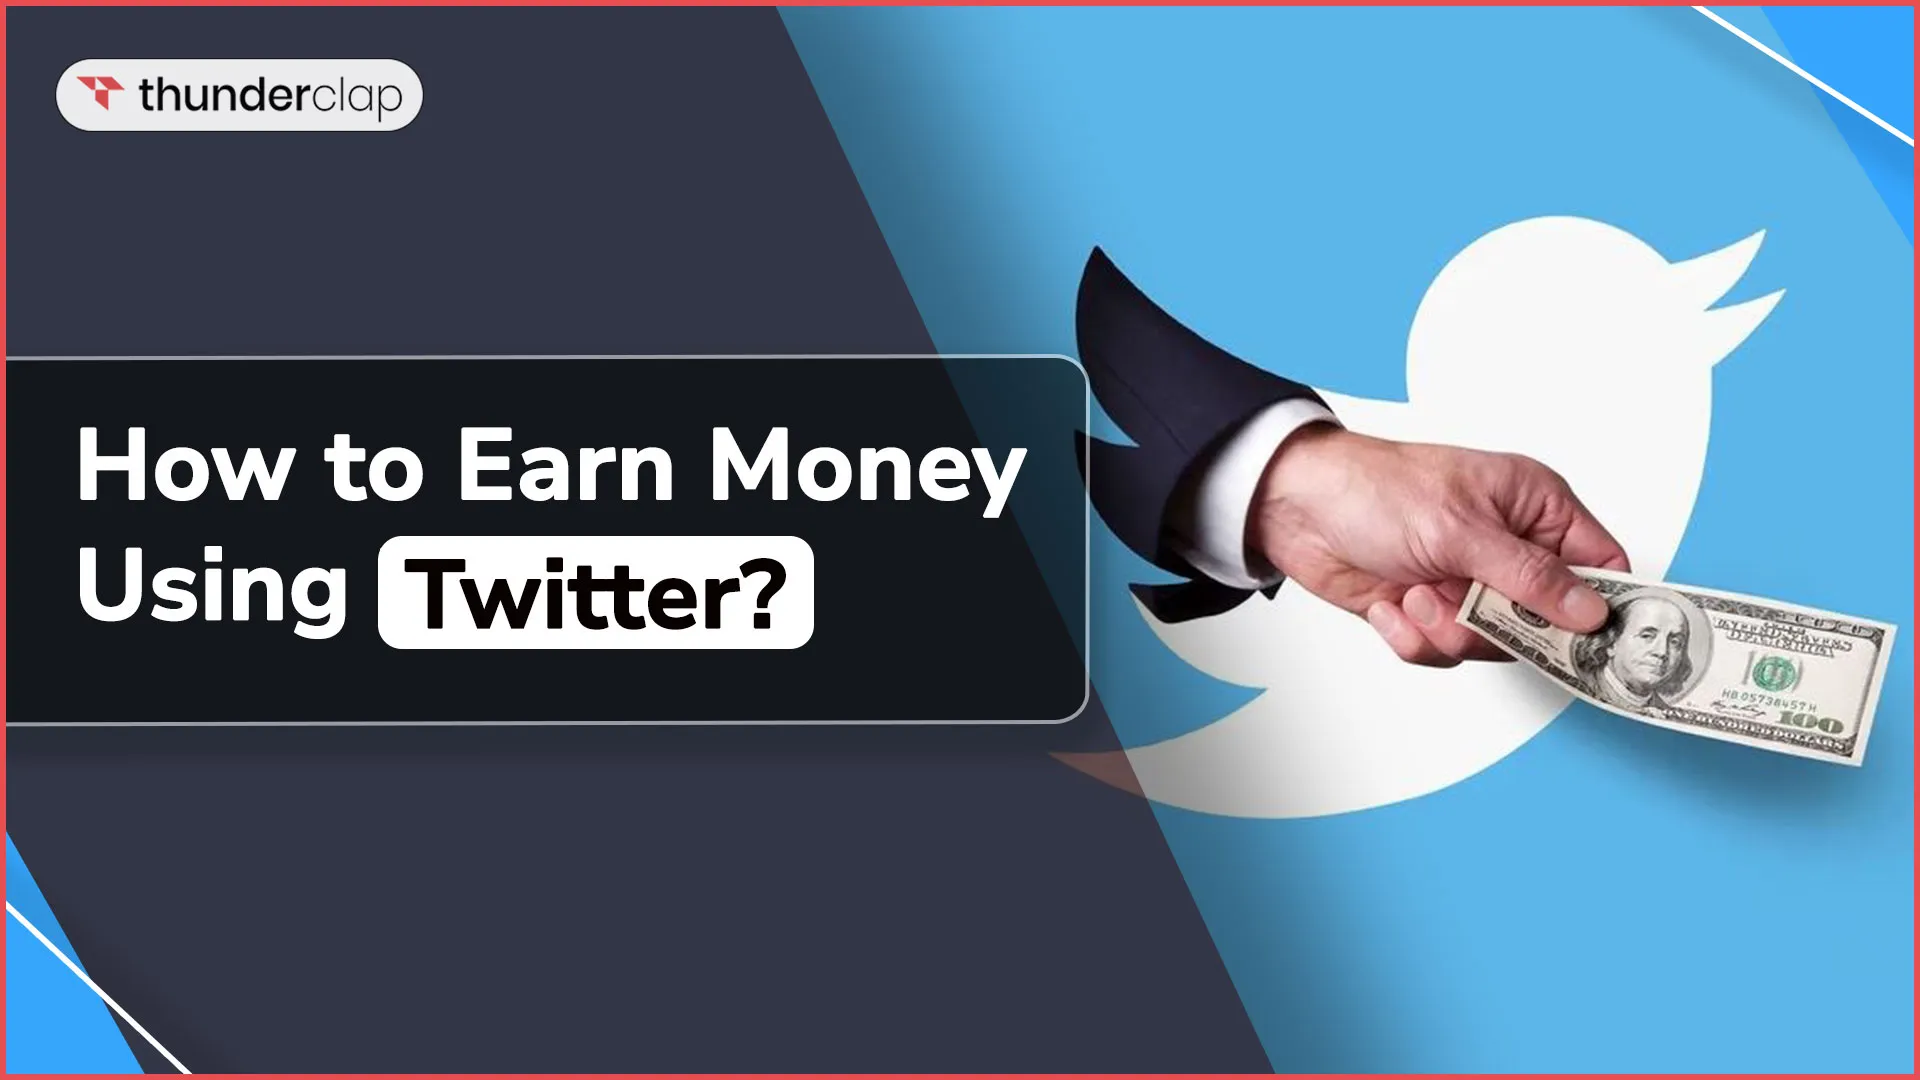 How To Earn Money Using Twitter? - Step By Step Guide